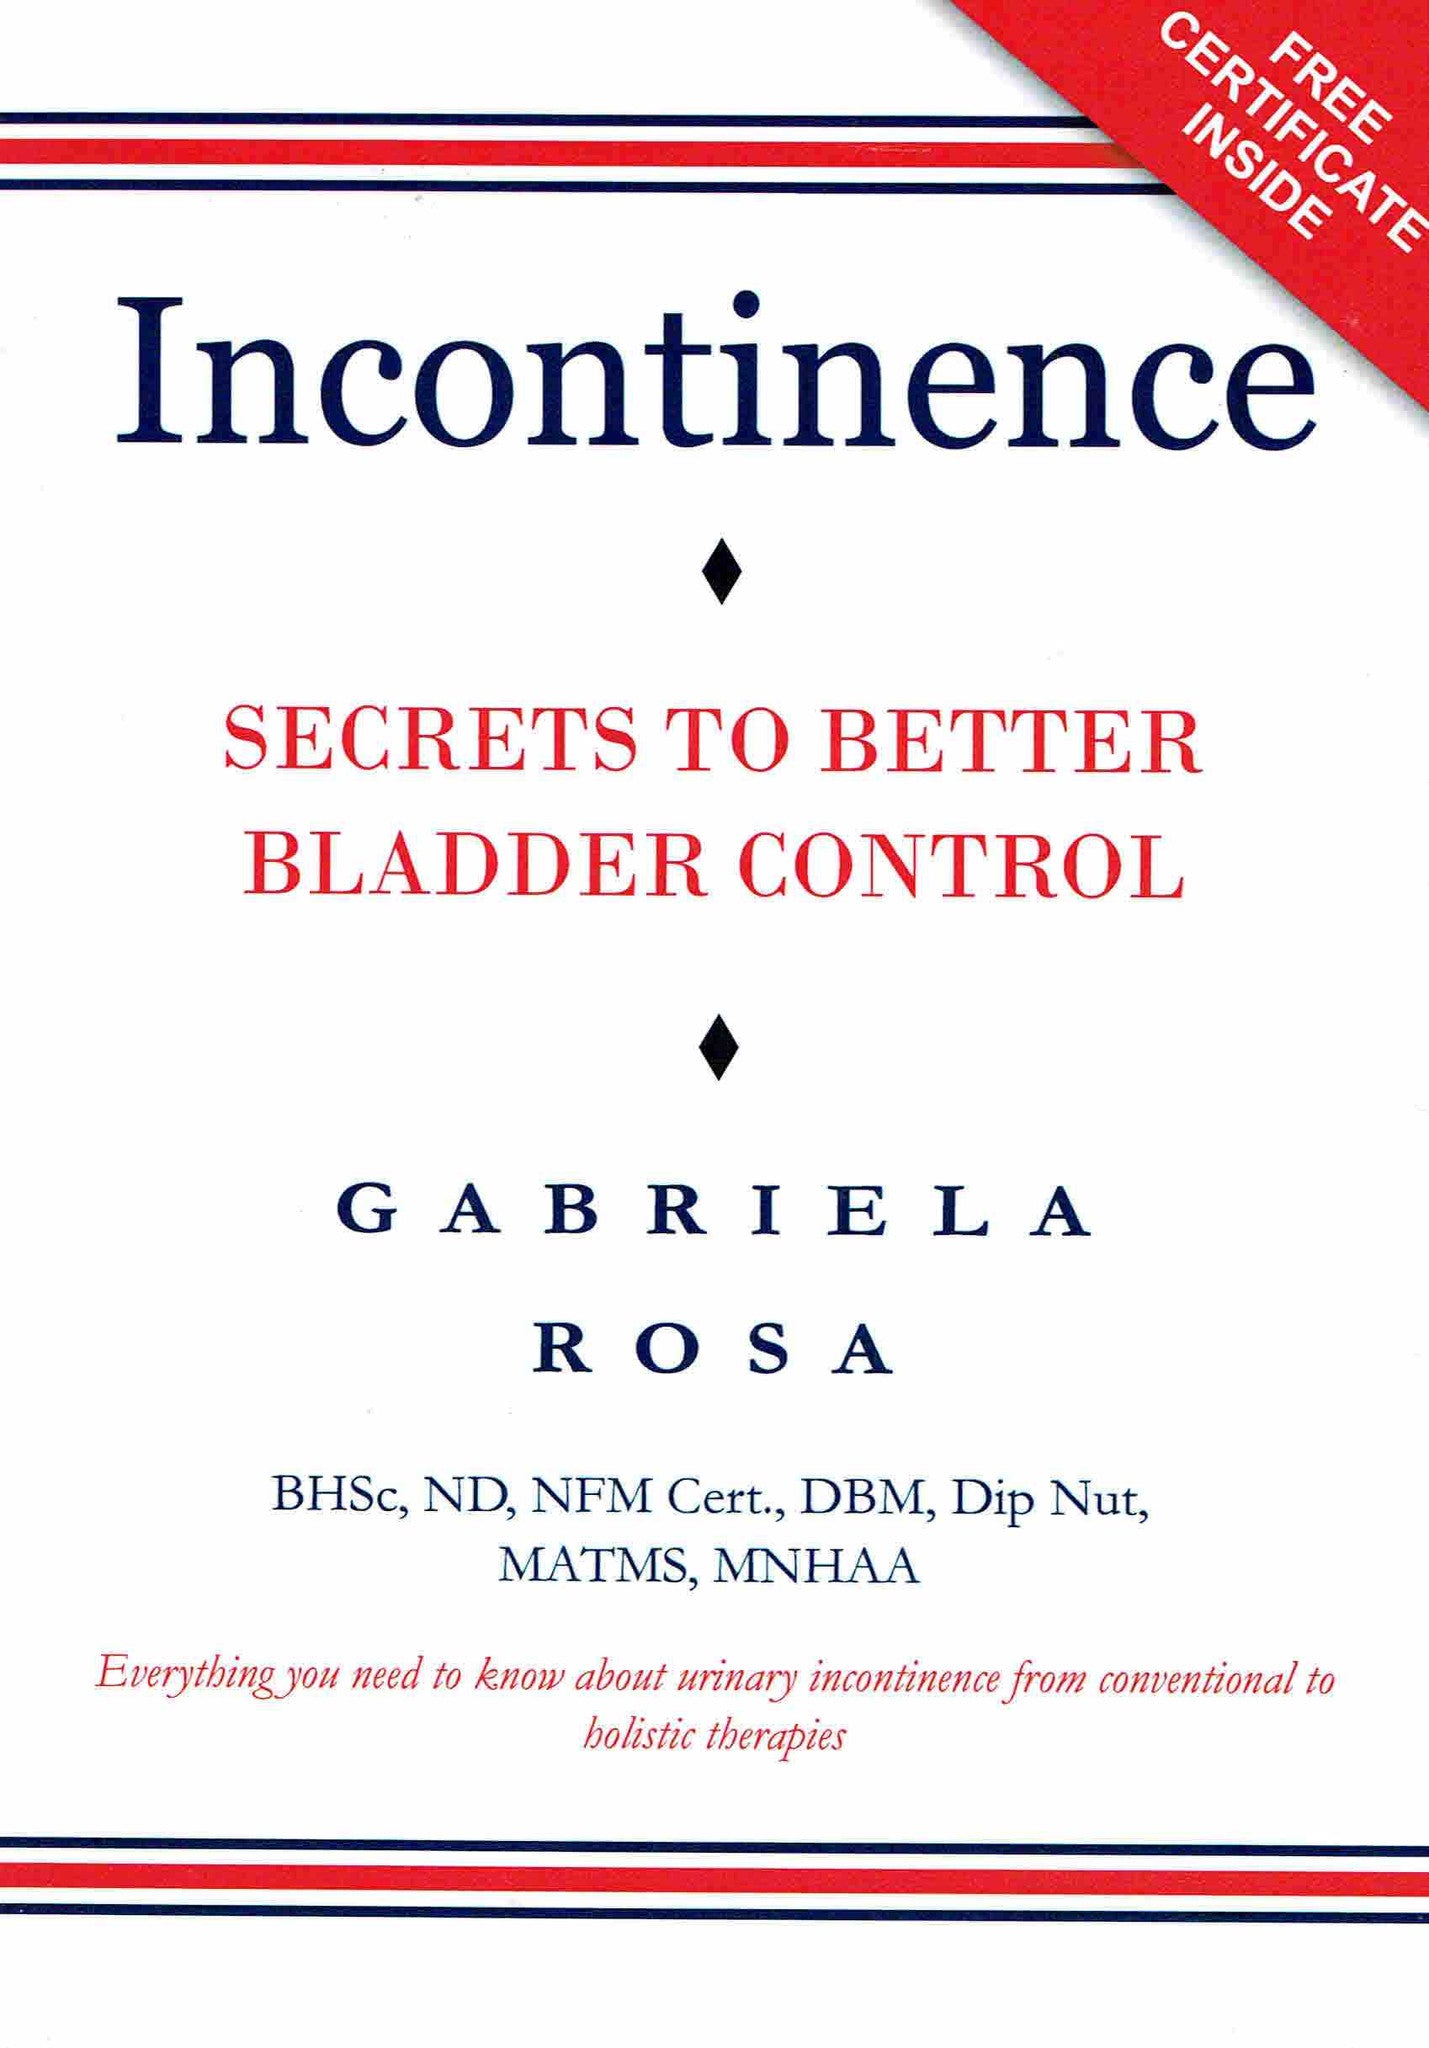 Incontinence - Secrets to Better Bladder Control